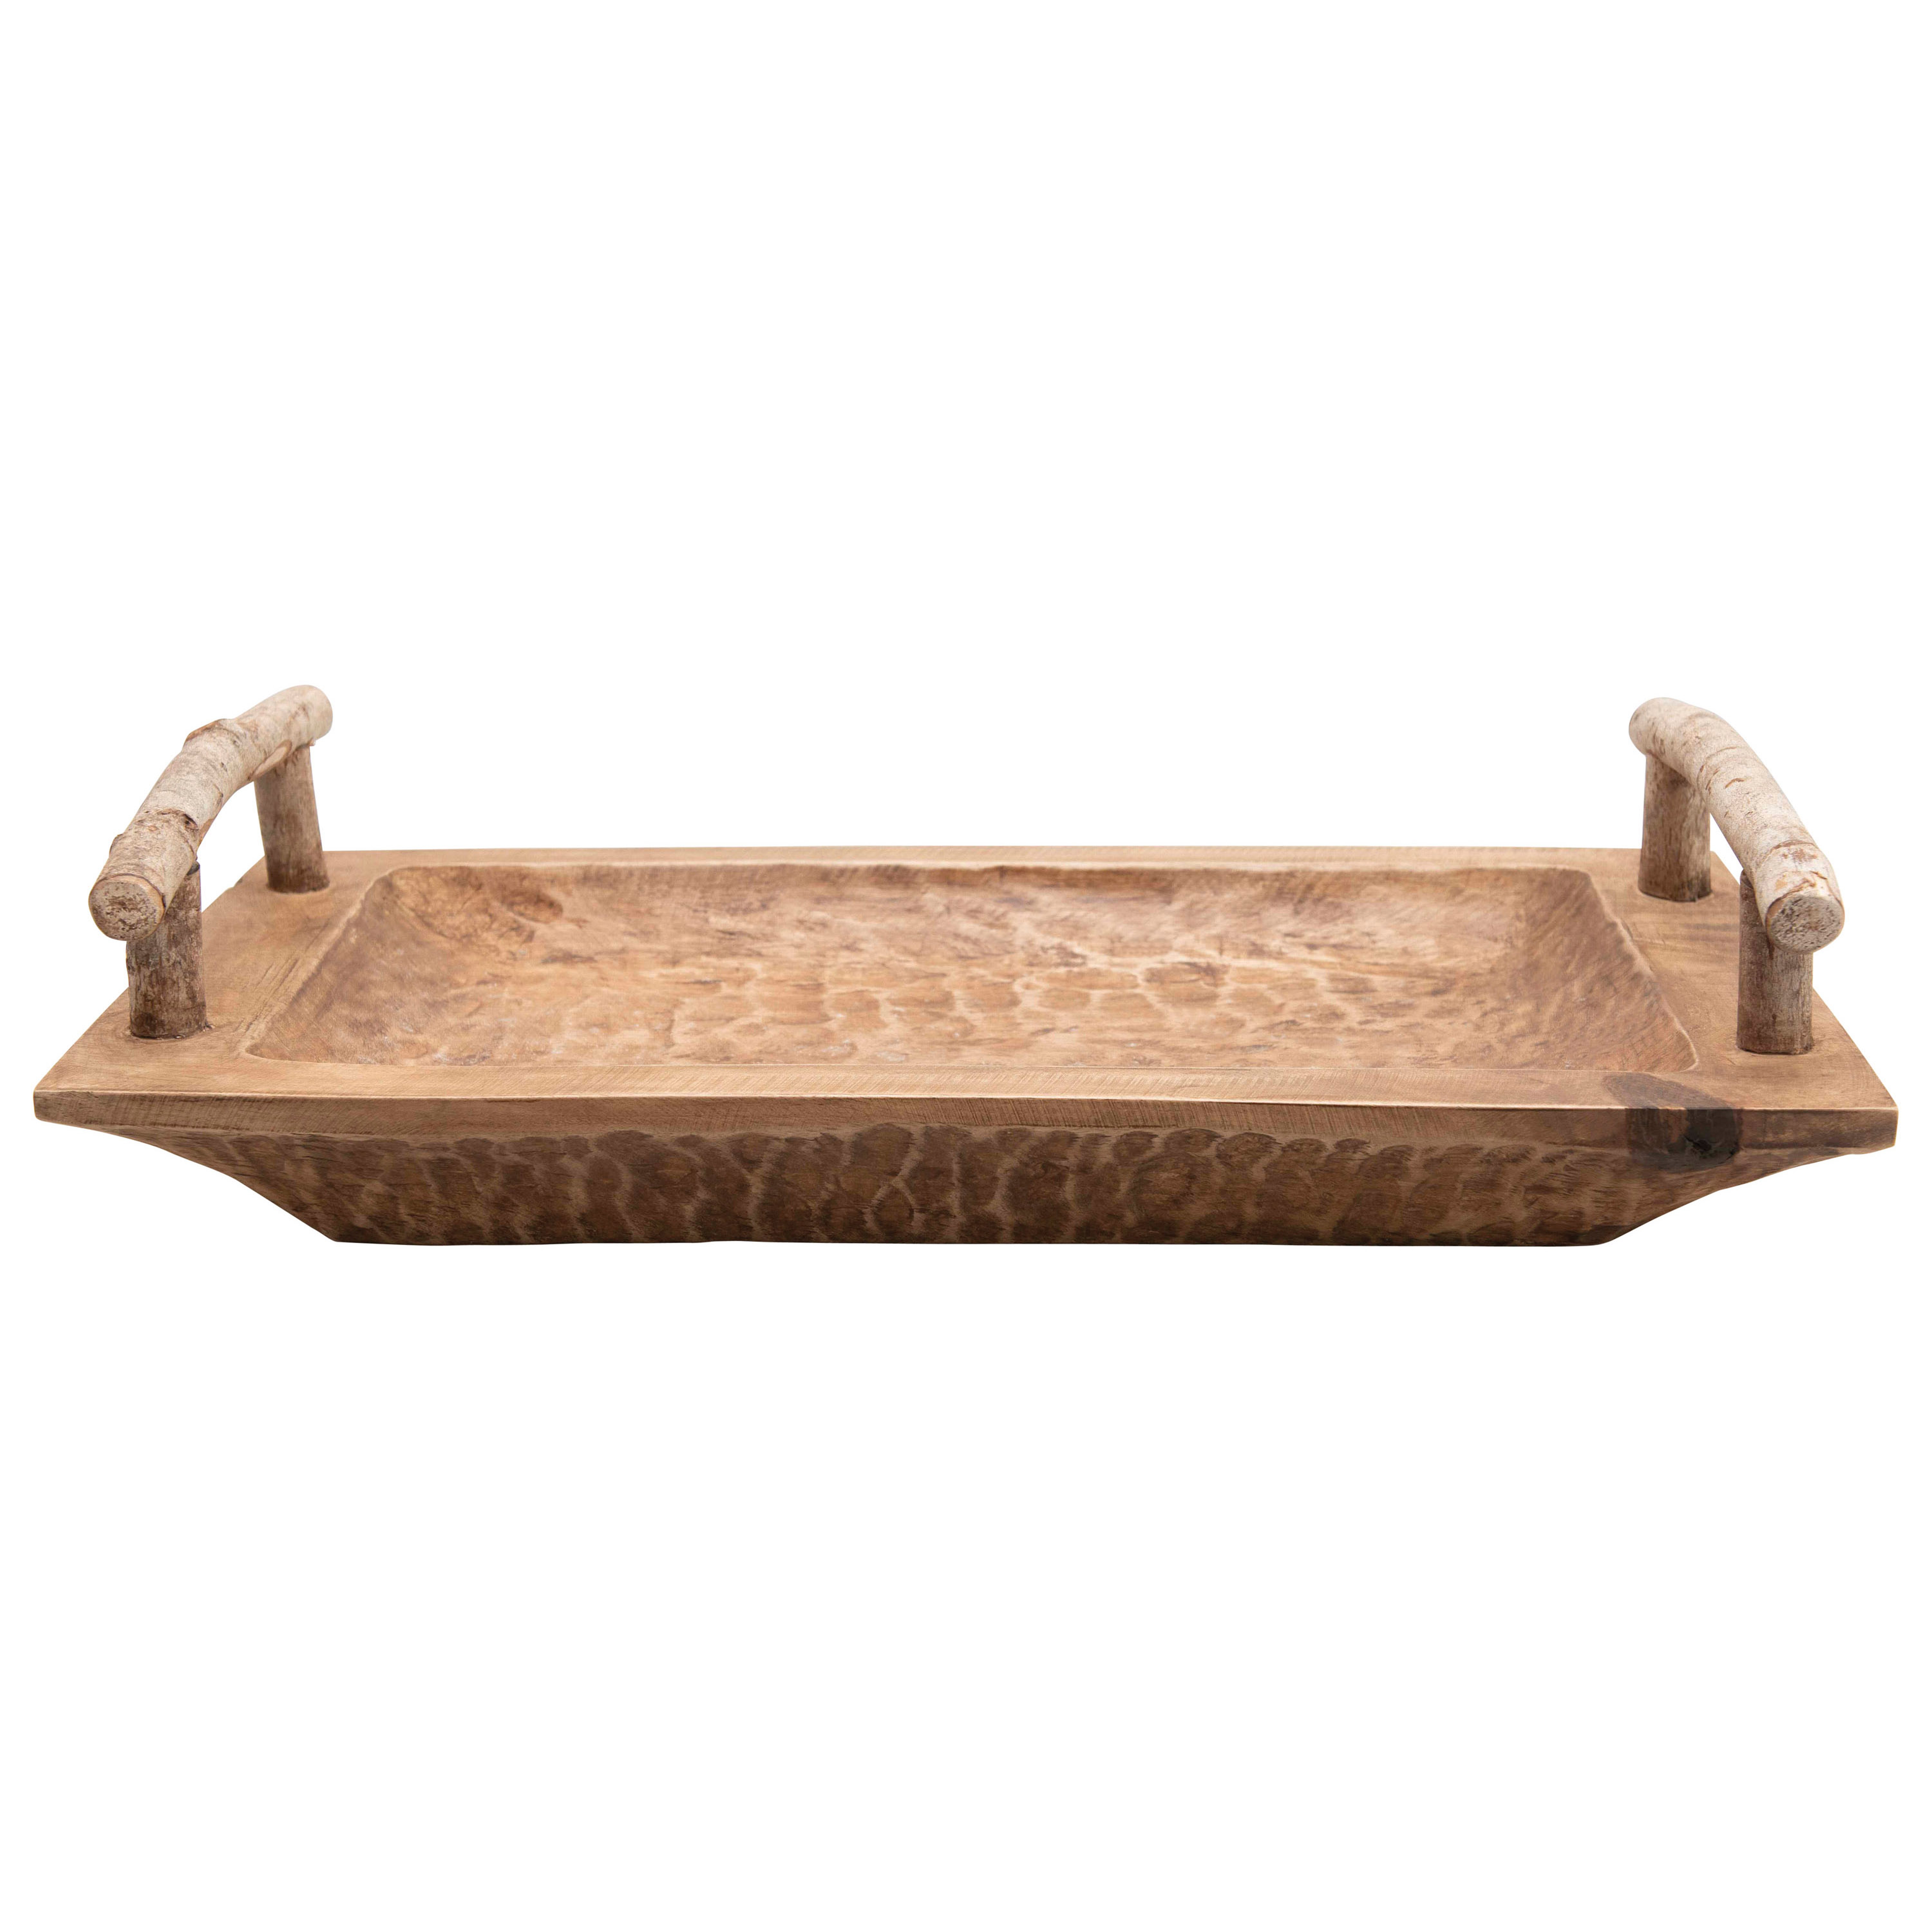 Hand-Carved Mango Wood Tray with Birch Branch Handles - Nomad Home